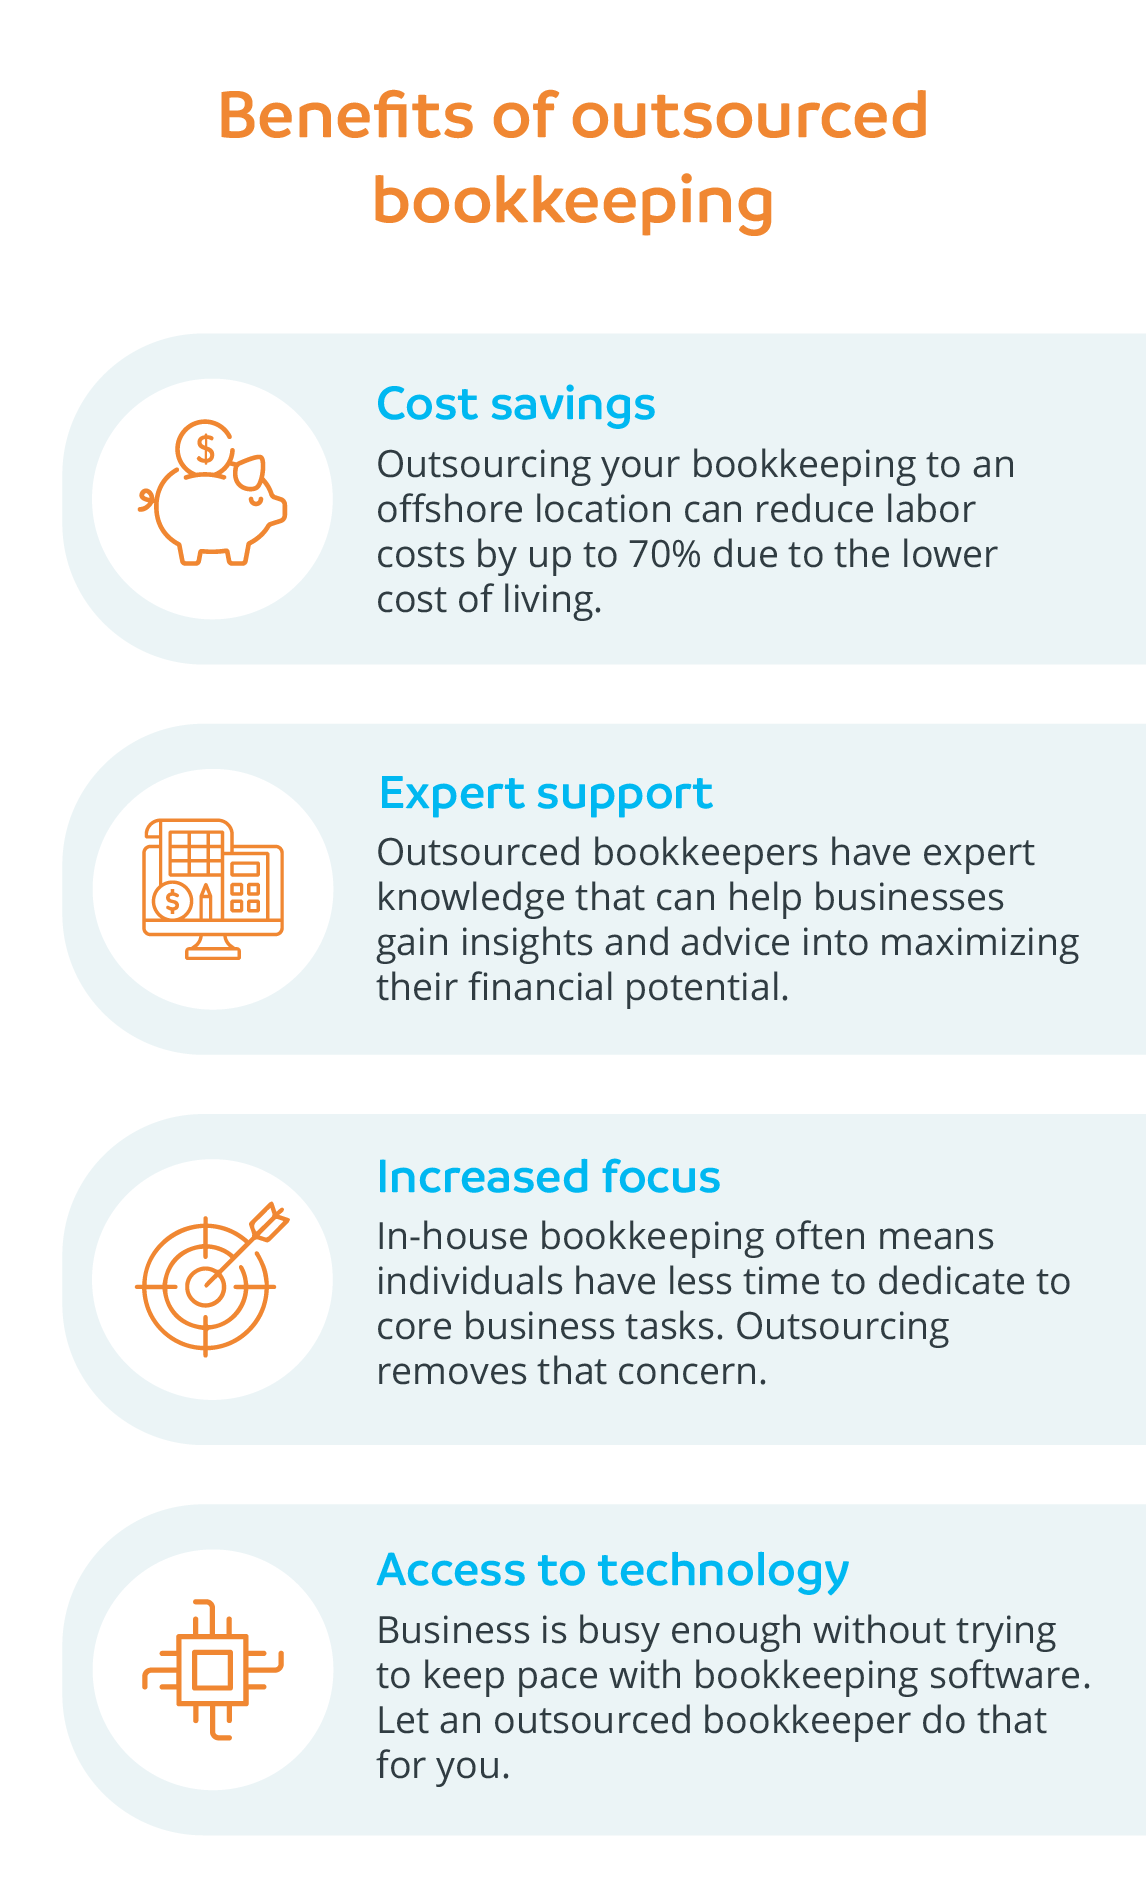 Benefits of outsourced bookkeeping